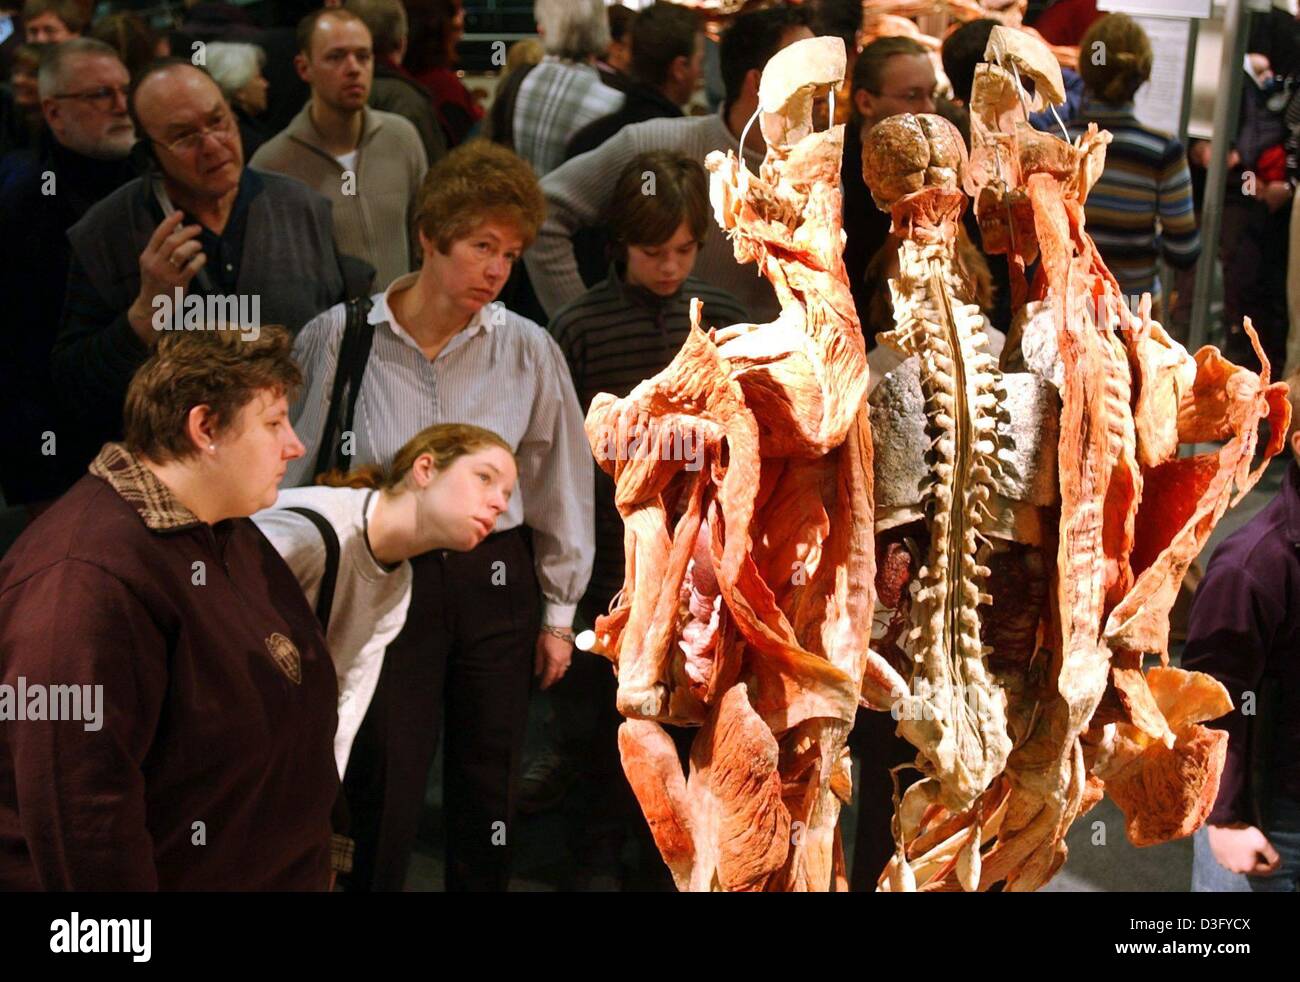 (dpa) - Visitors look at an exhibit at the Body World exhibition in Munich, Germany, 23 February 2003. After weeks of debates the Bavarian administrative court approved on 21 February 2003 of the controversial exhibition Body Worlds to exhibit in Munich. But not all of the prepared human bodies are allowed to be exhibited. Stock Photo